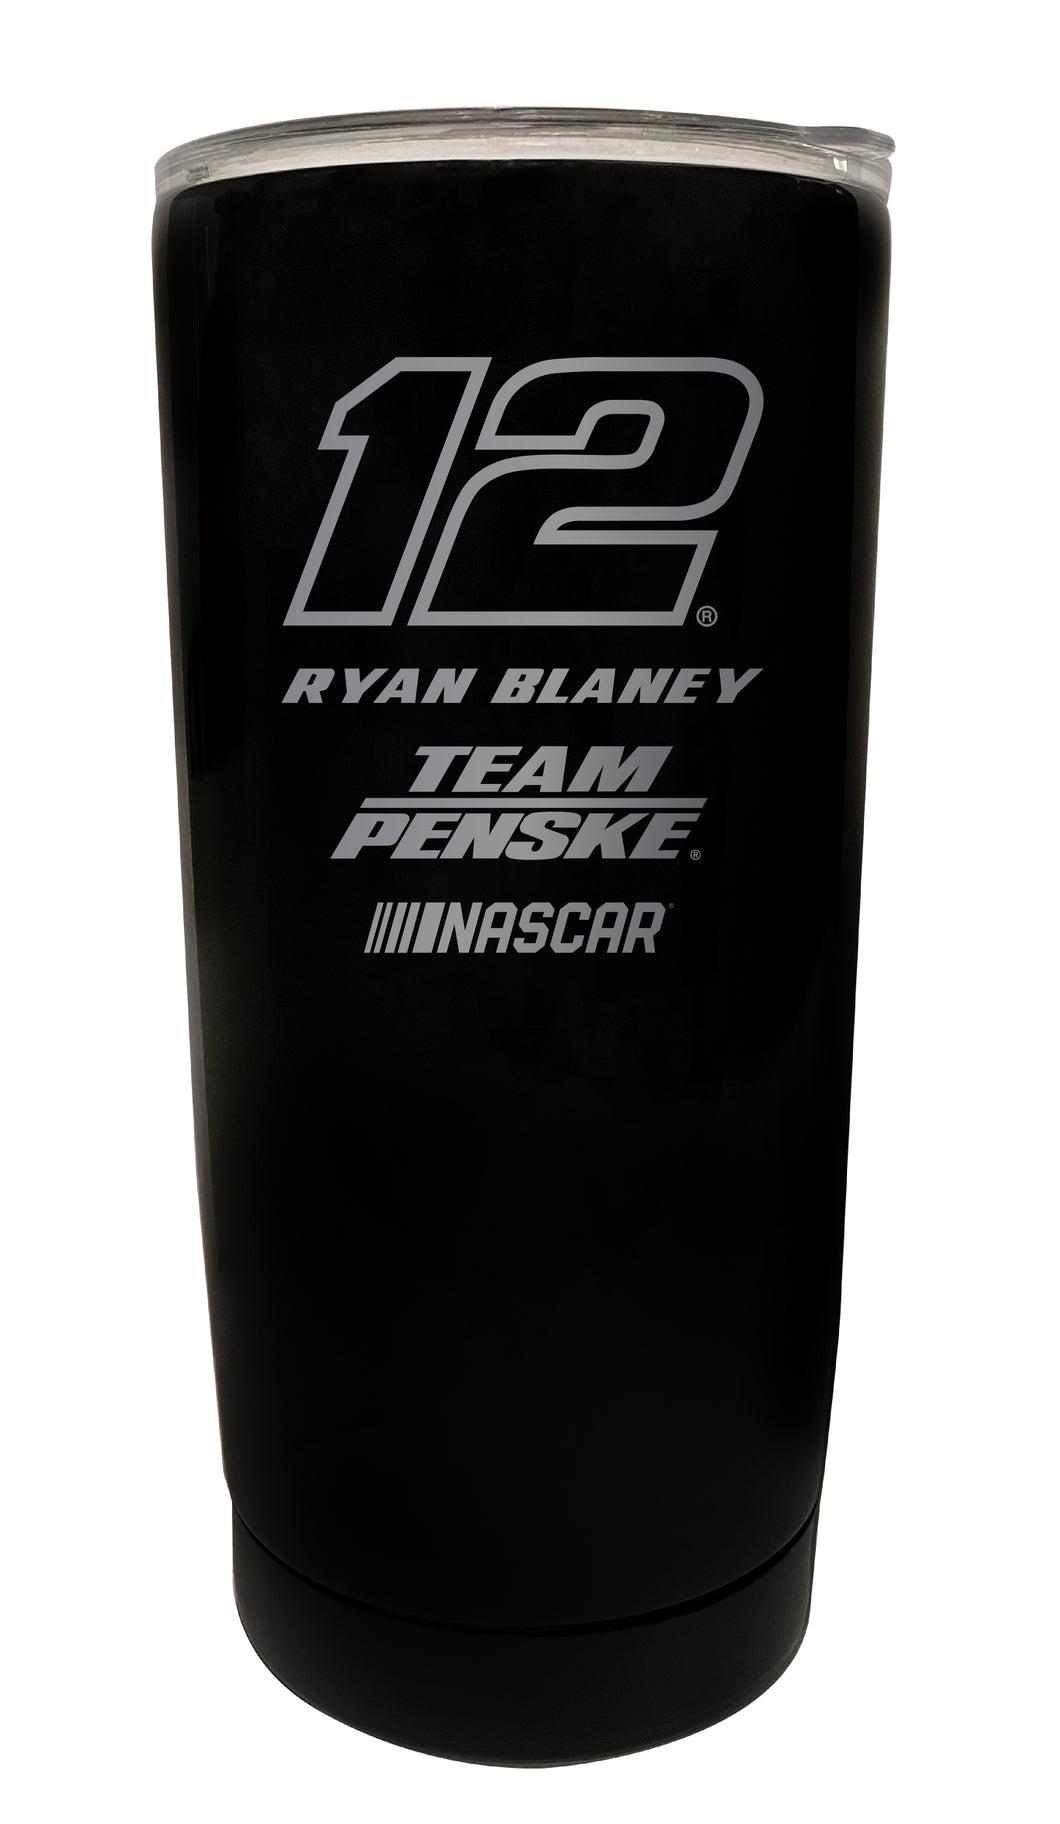 Ryan Blaney NASCAR #12 Etched 16 oz Stainless Steel Tumbler